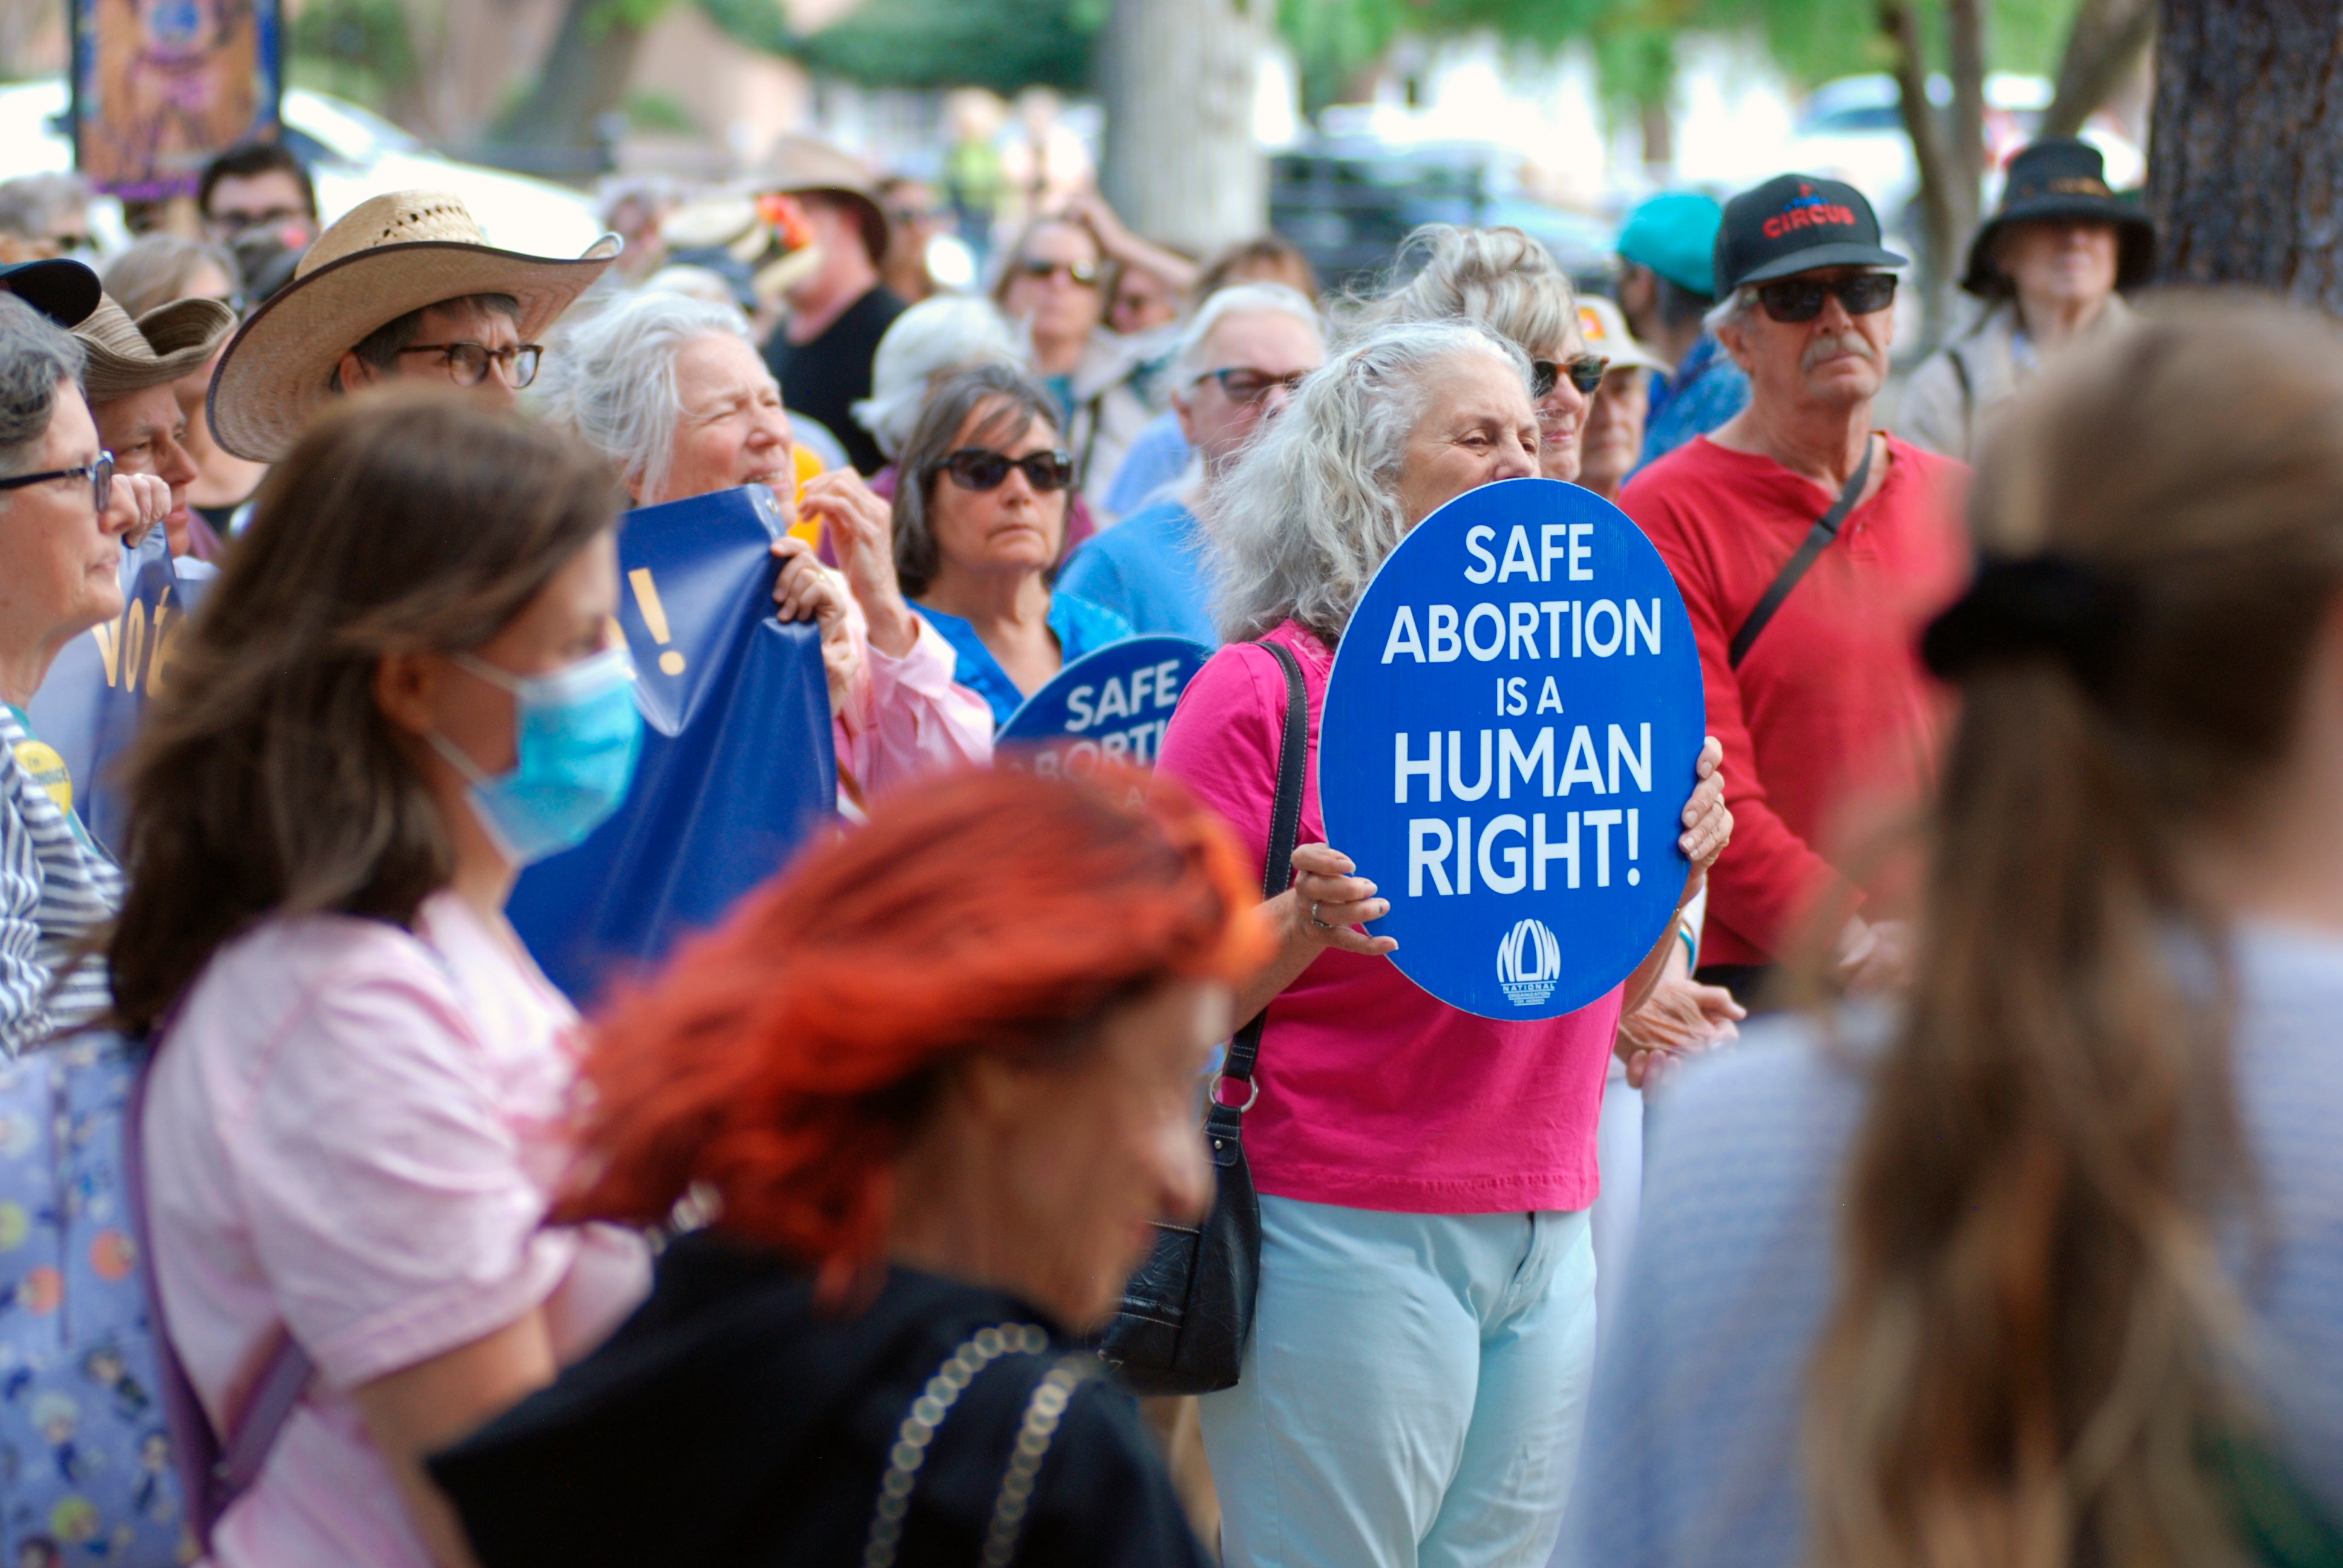 Protesters gather at a rally in support of abortion rights outside a federal courthouse in Santa Fe, New Mexico, on 3 May